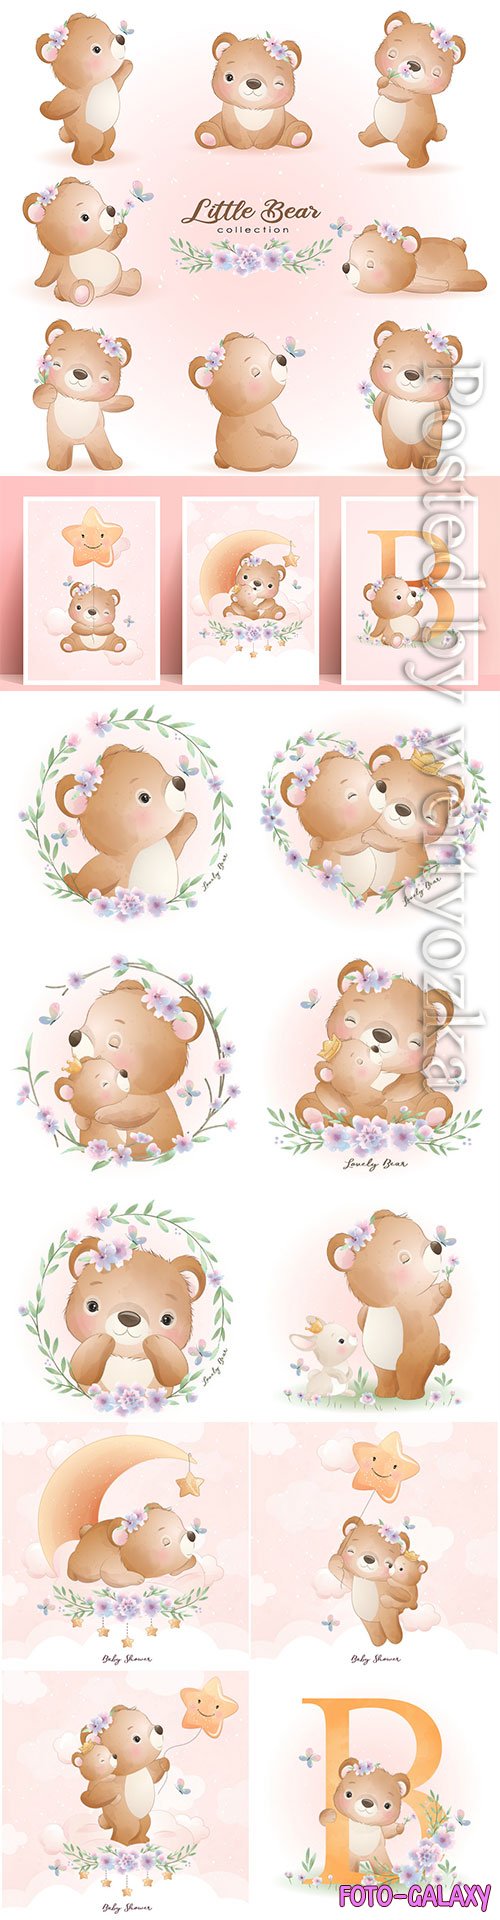 Cute doodle bear poses with floral set illustration premium vector